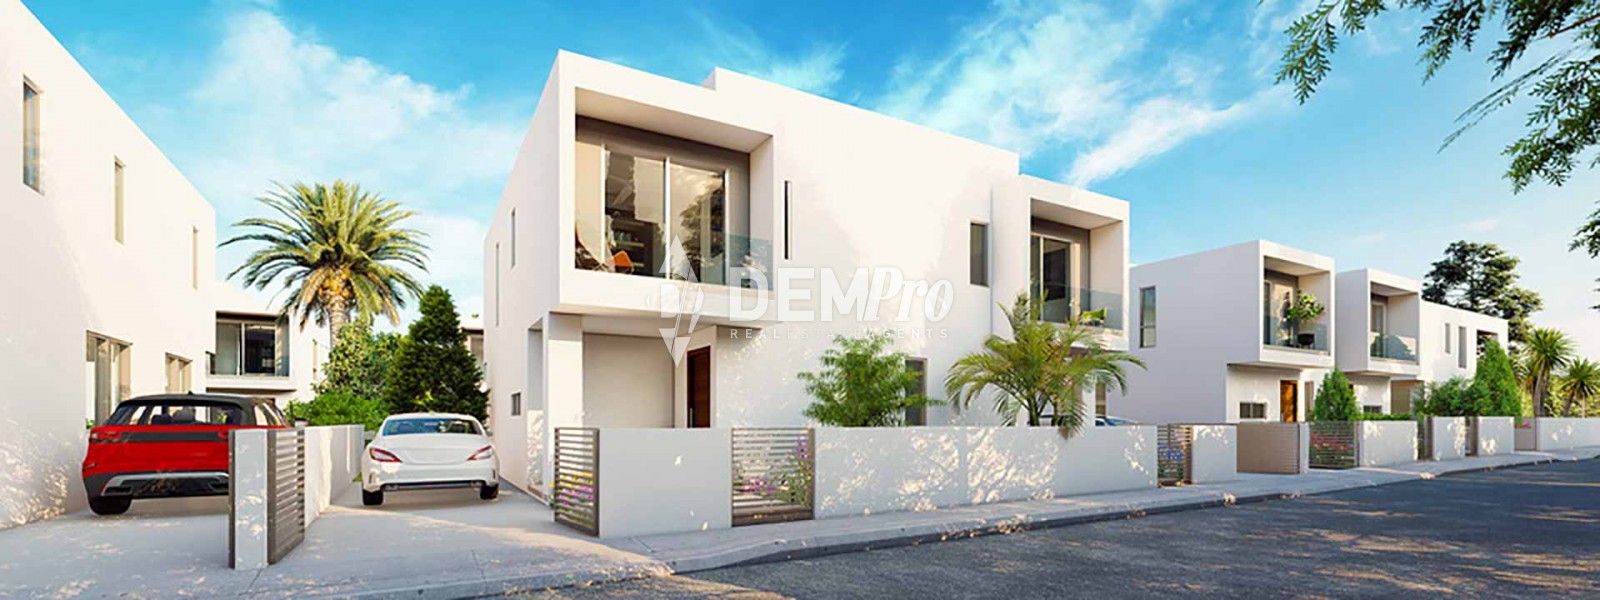 3 Bedroom House for Sale in Mandria, Paphos District